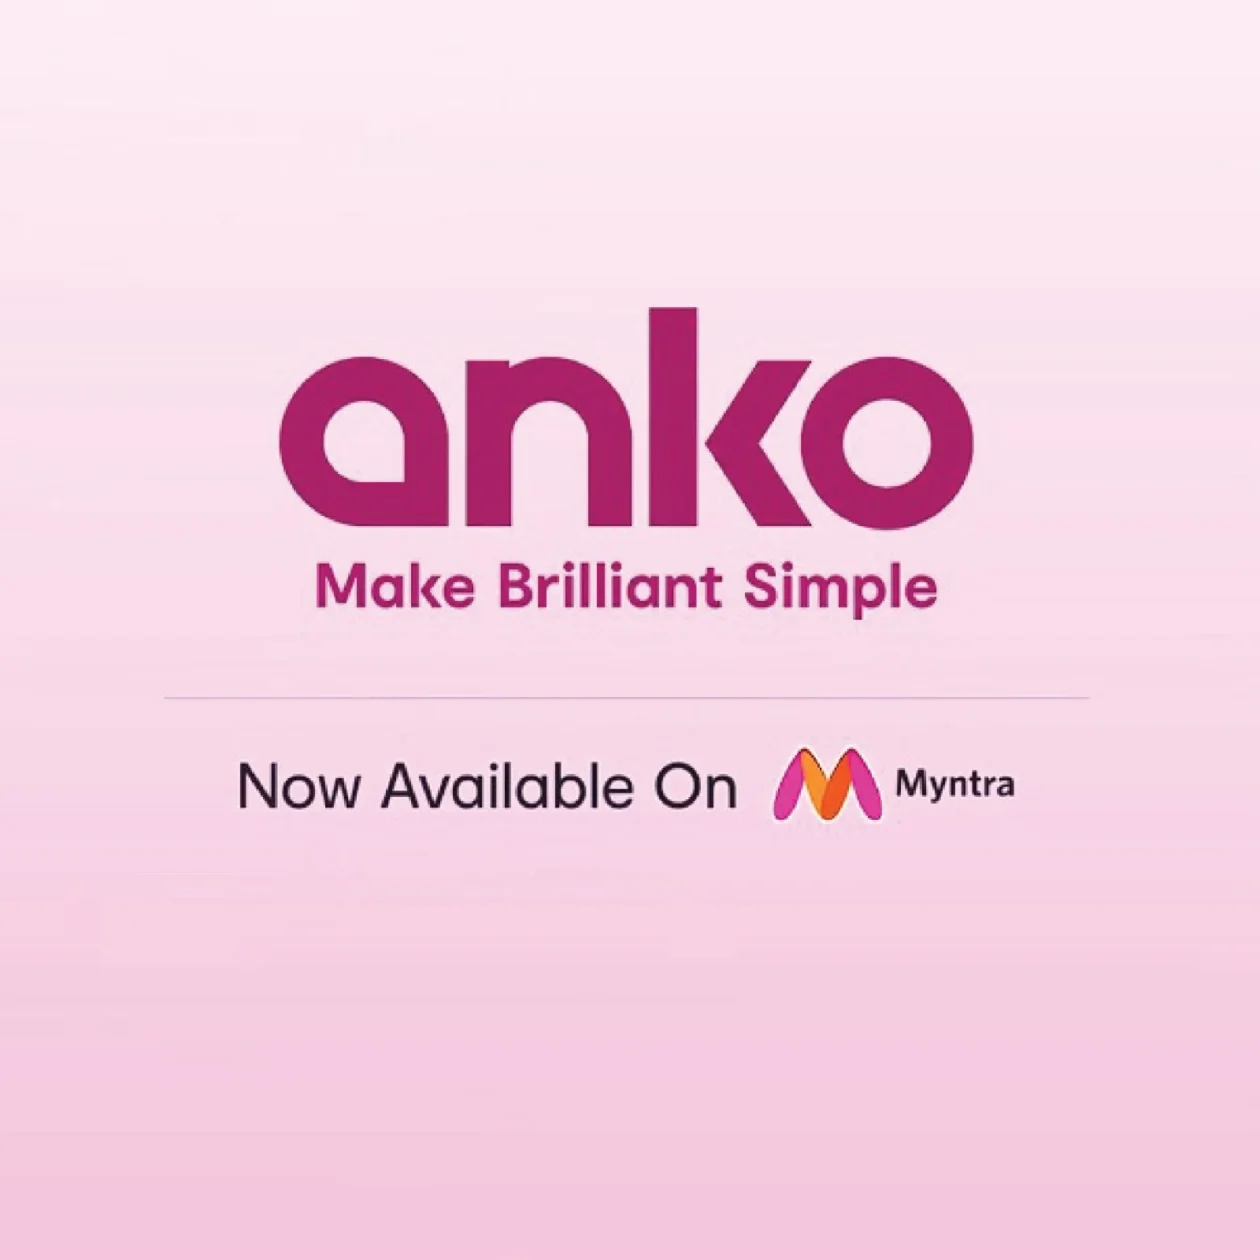 Anko, Australia's Beloved Homeware Brand, Partners with Myntra, Offering Unmissable 50% Discount